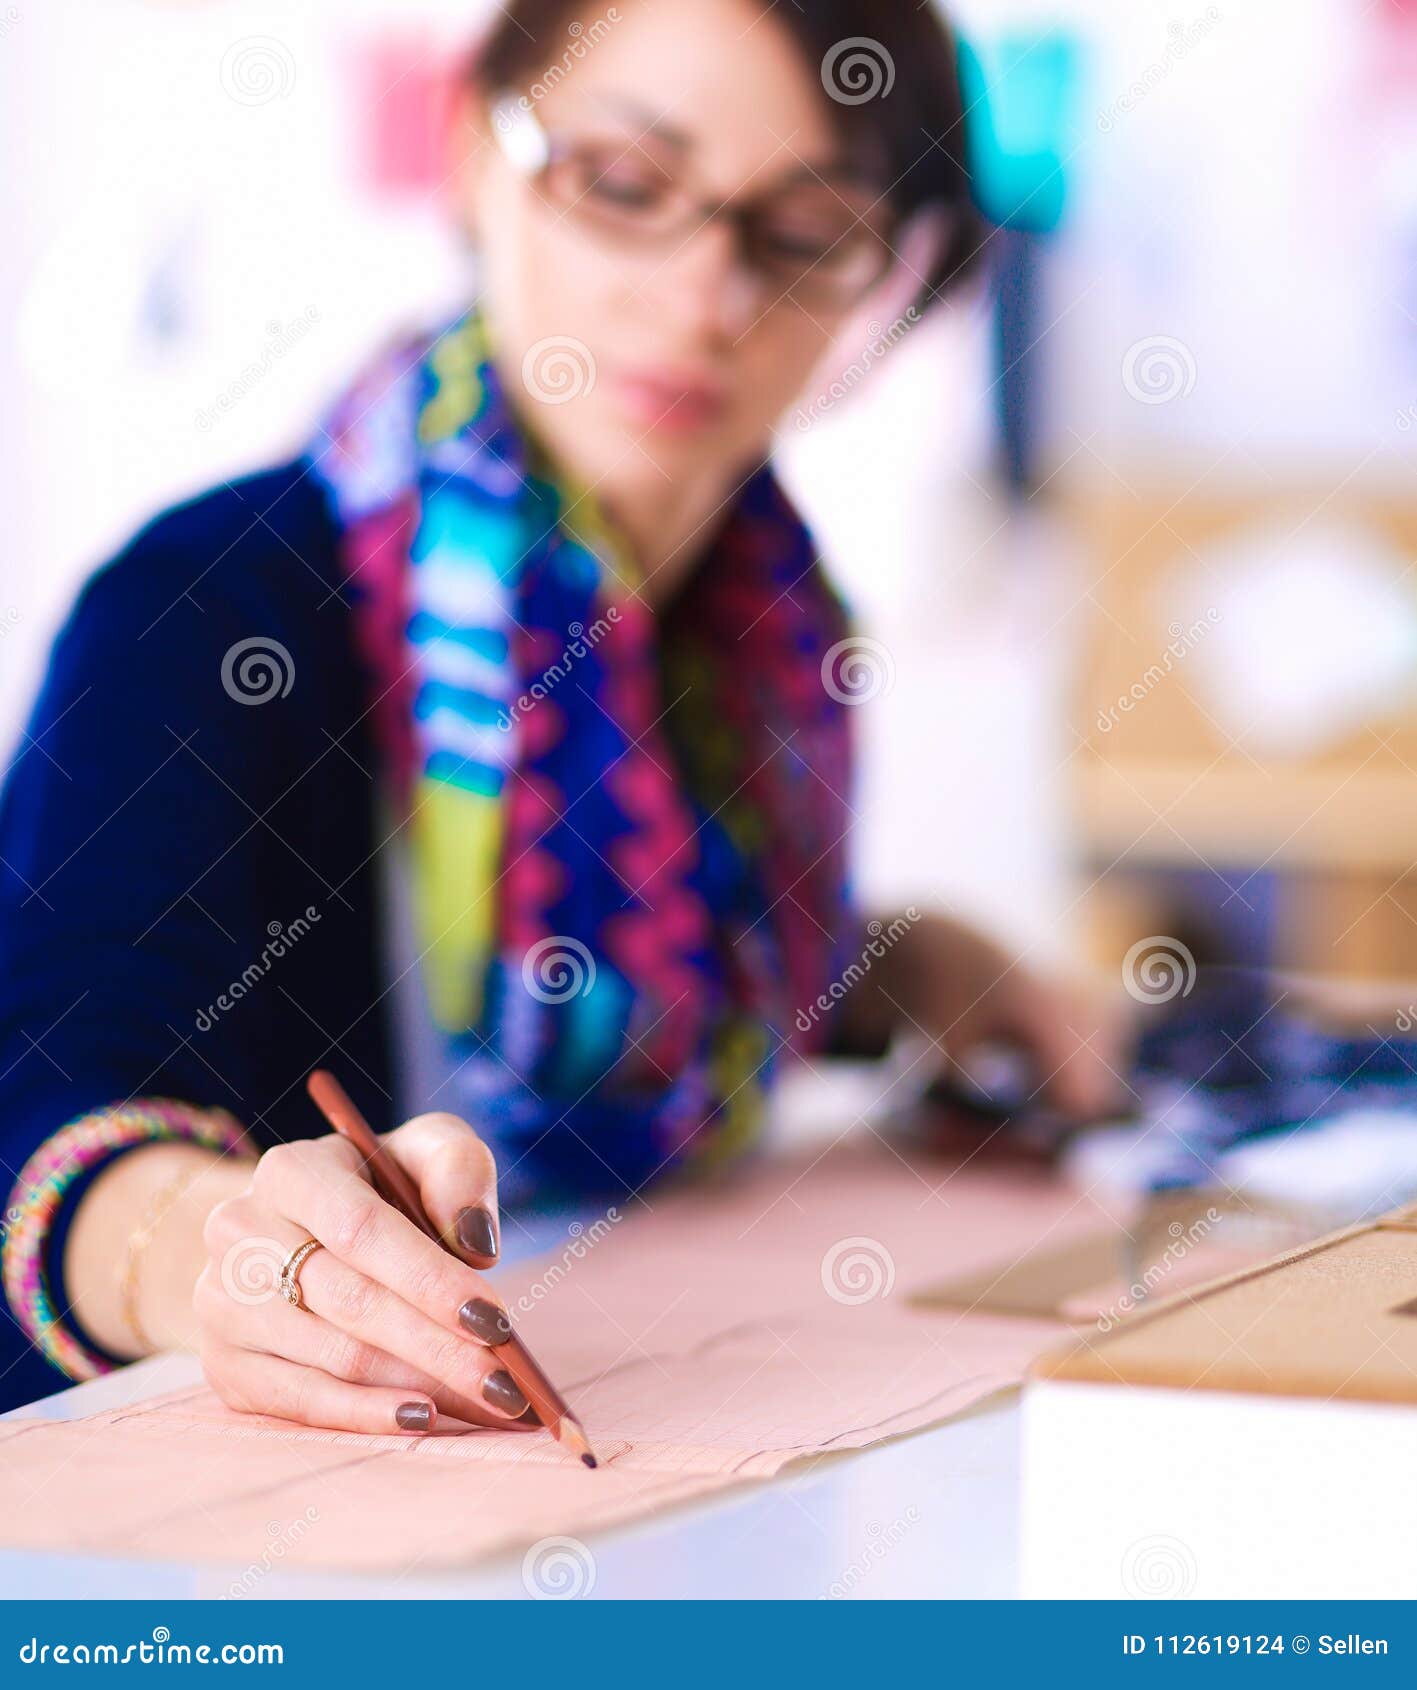 Dressmaker Designing Clothes Pattern on Paper Stock Photo - Image of ...